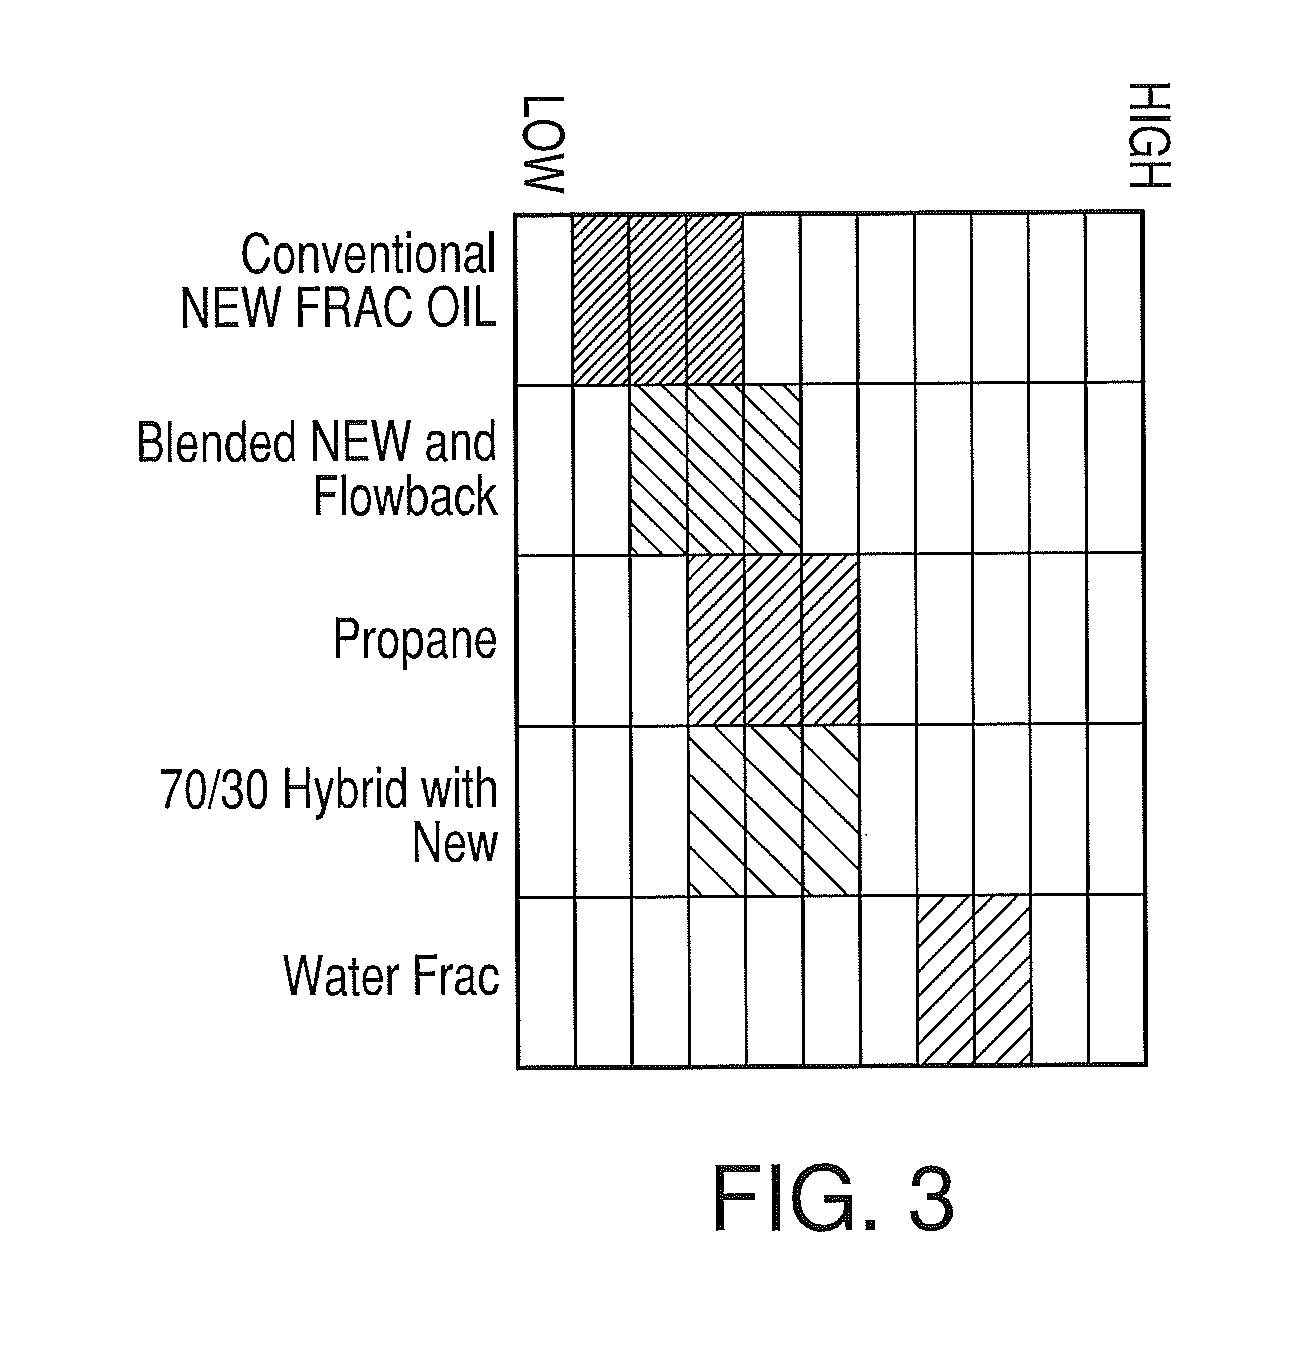 Environmentally sealed system for fracturing subterranean formations